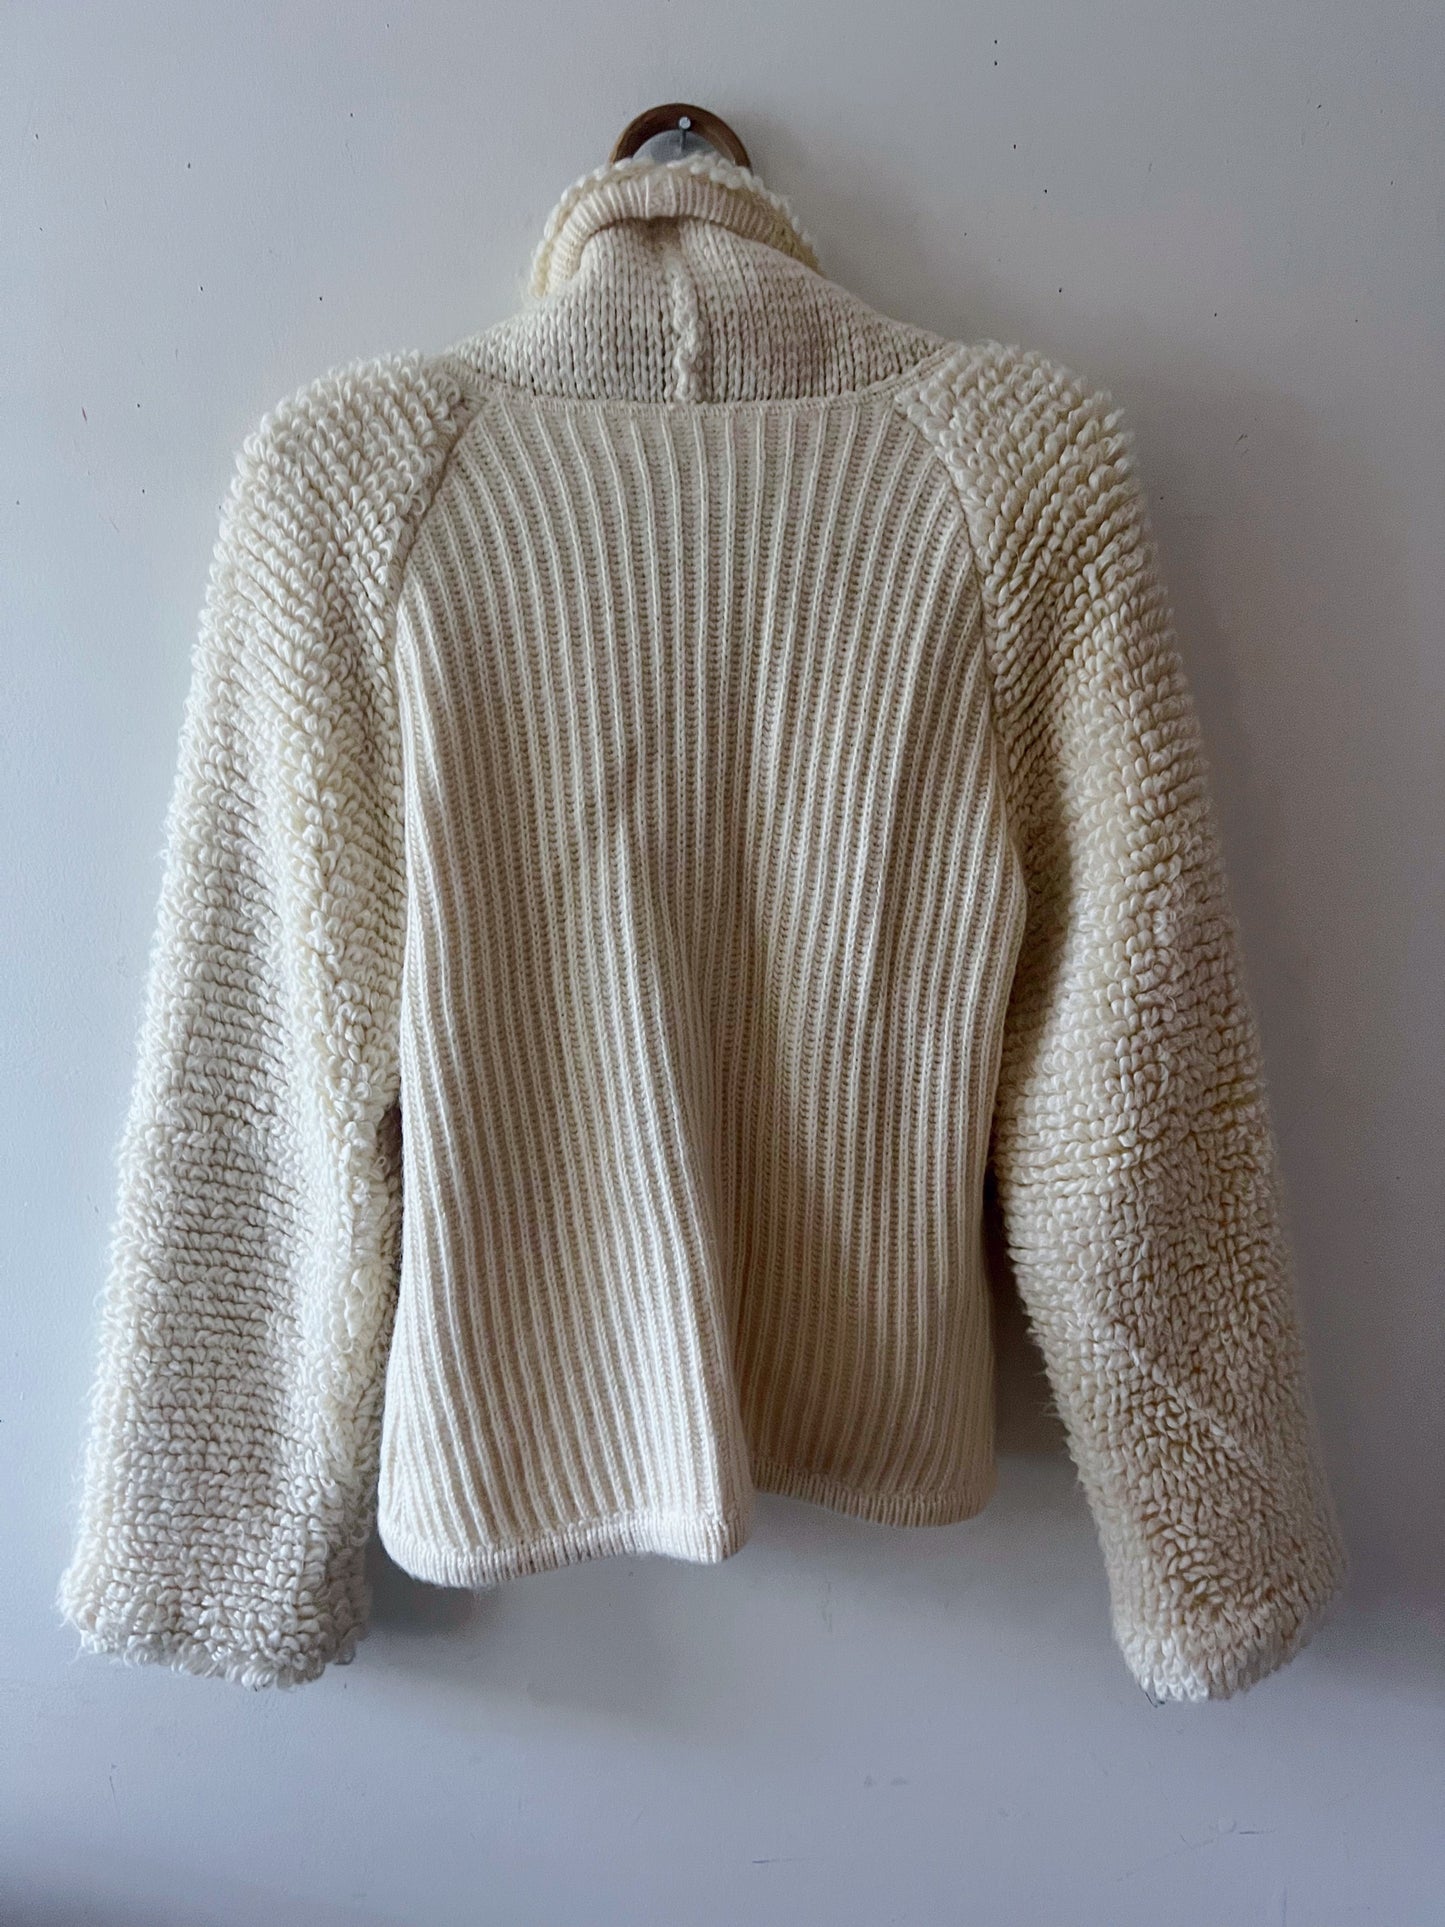 Chloe Mohair Textured Knit Sweater